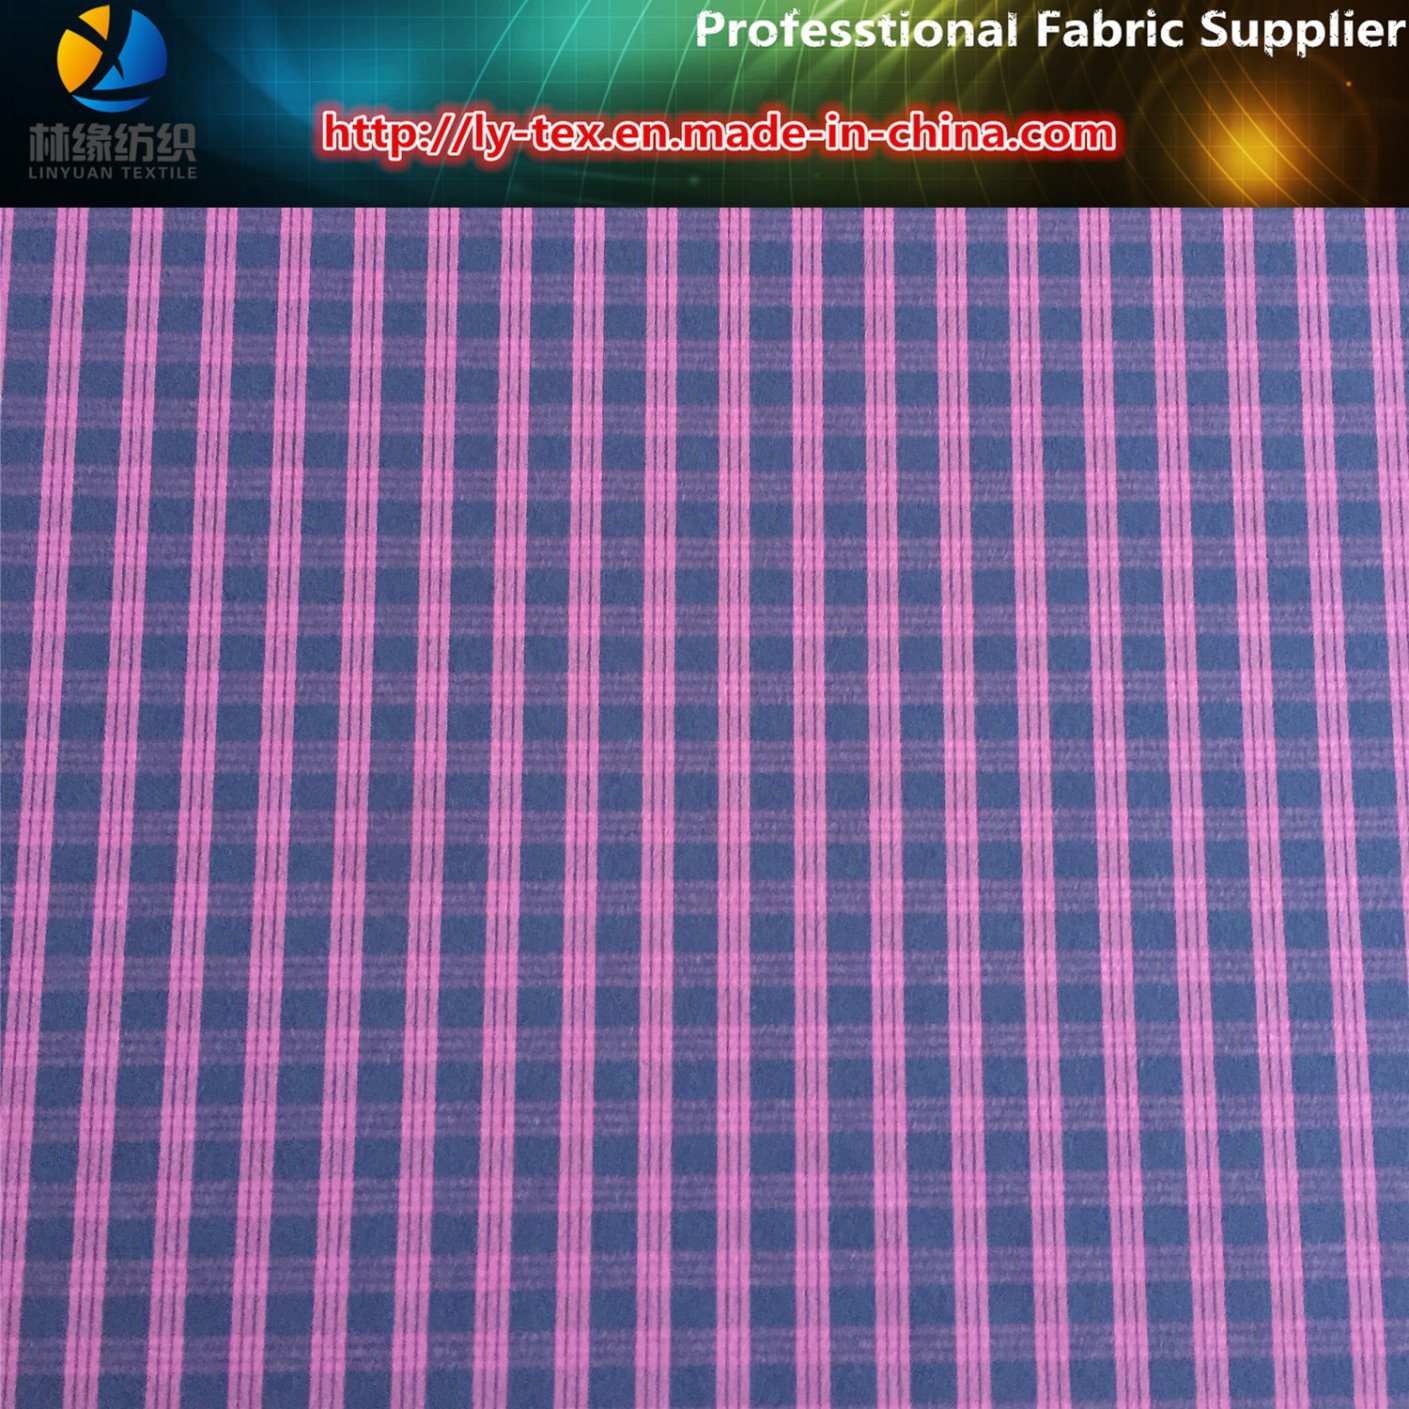 Polyester Y/D Check Shirting Fabric, Polyester+Spandex Fabric (YD1200)